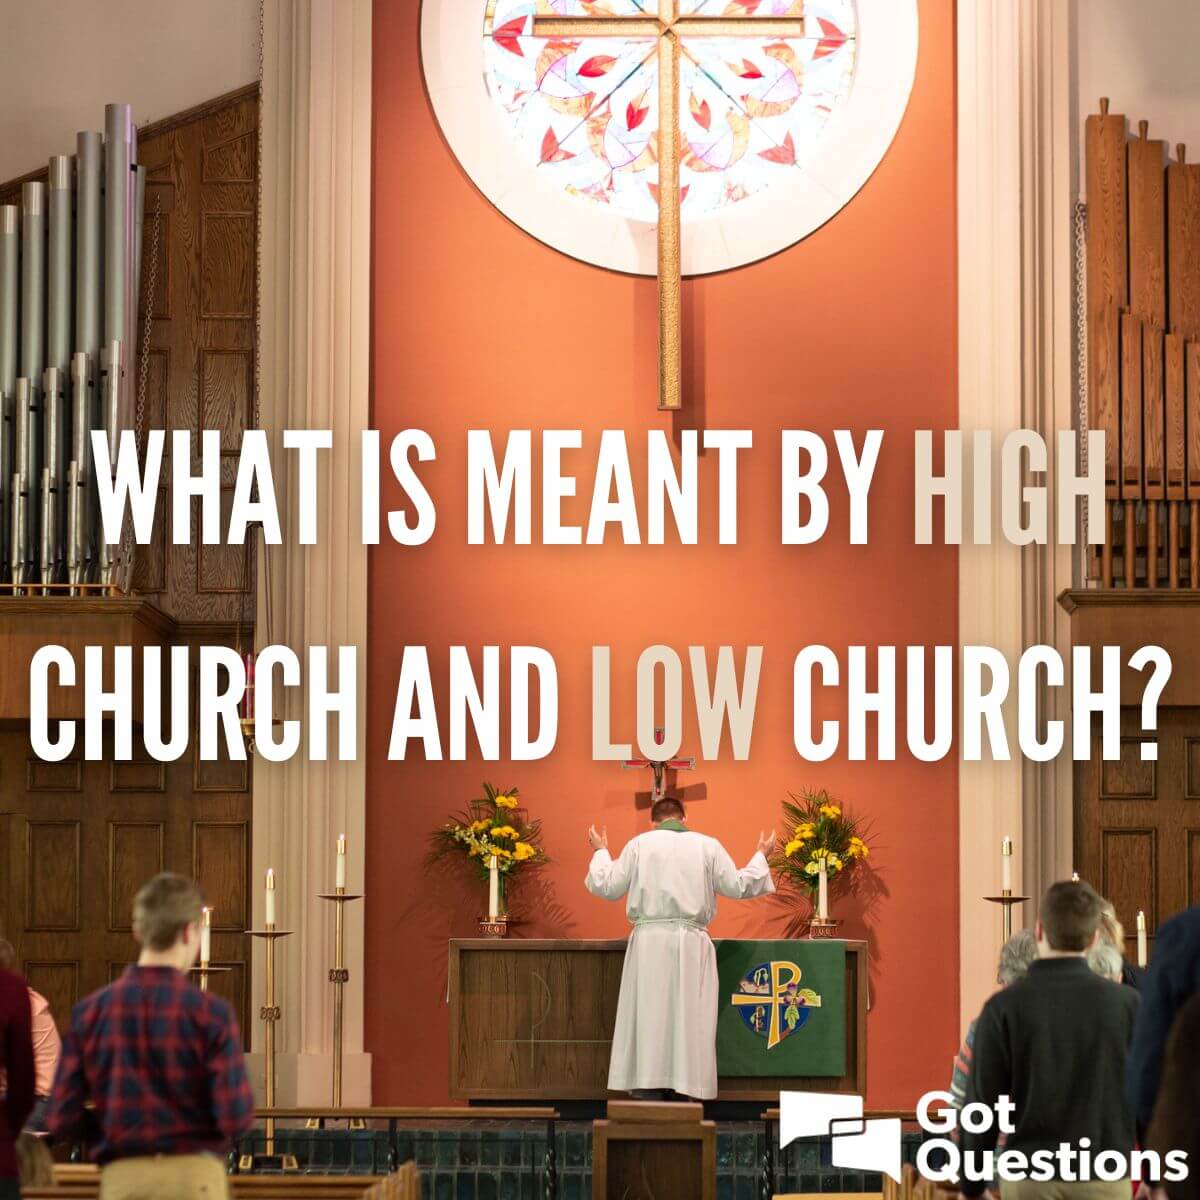 What is meant by High Church and Low Church